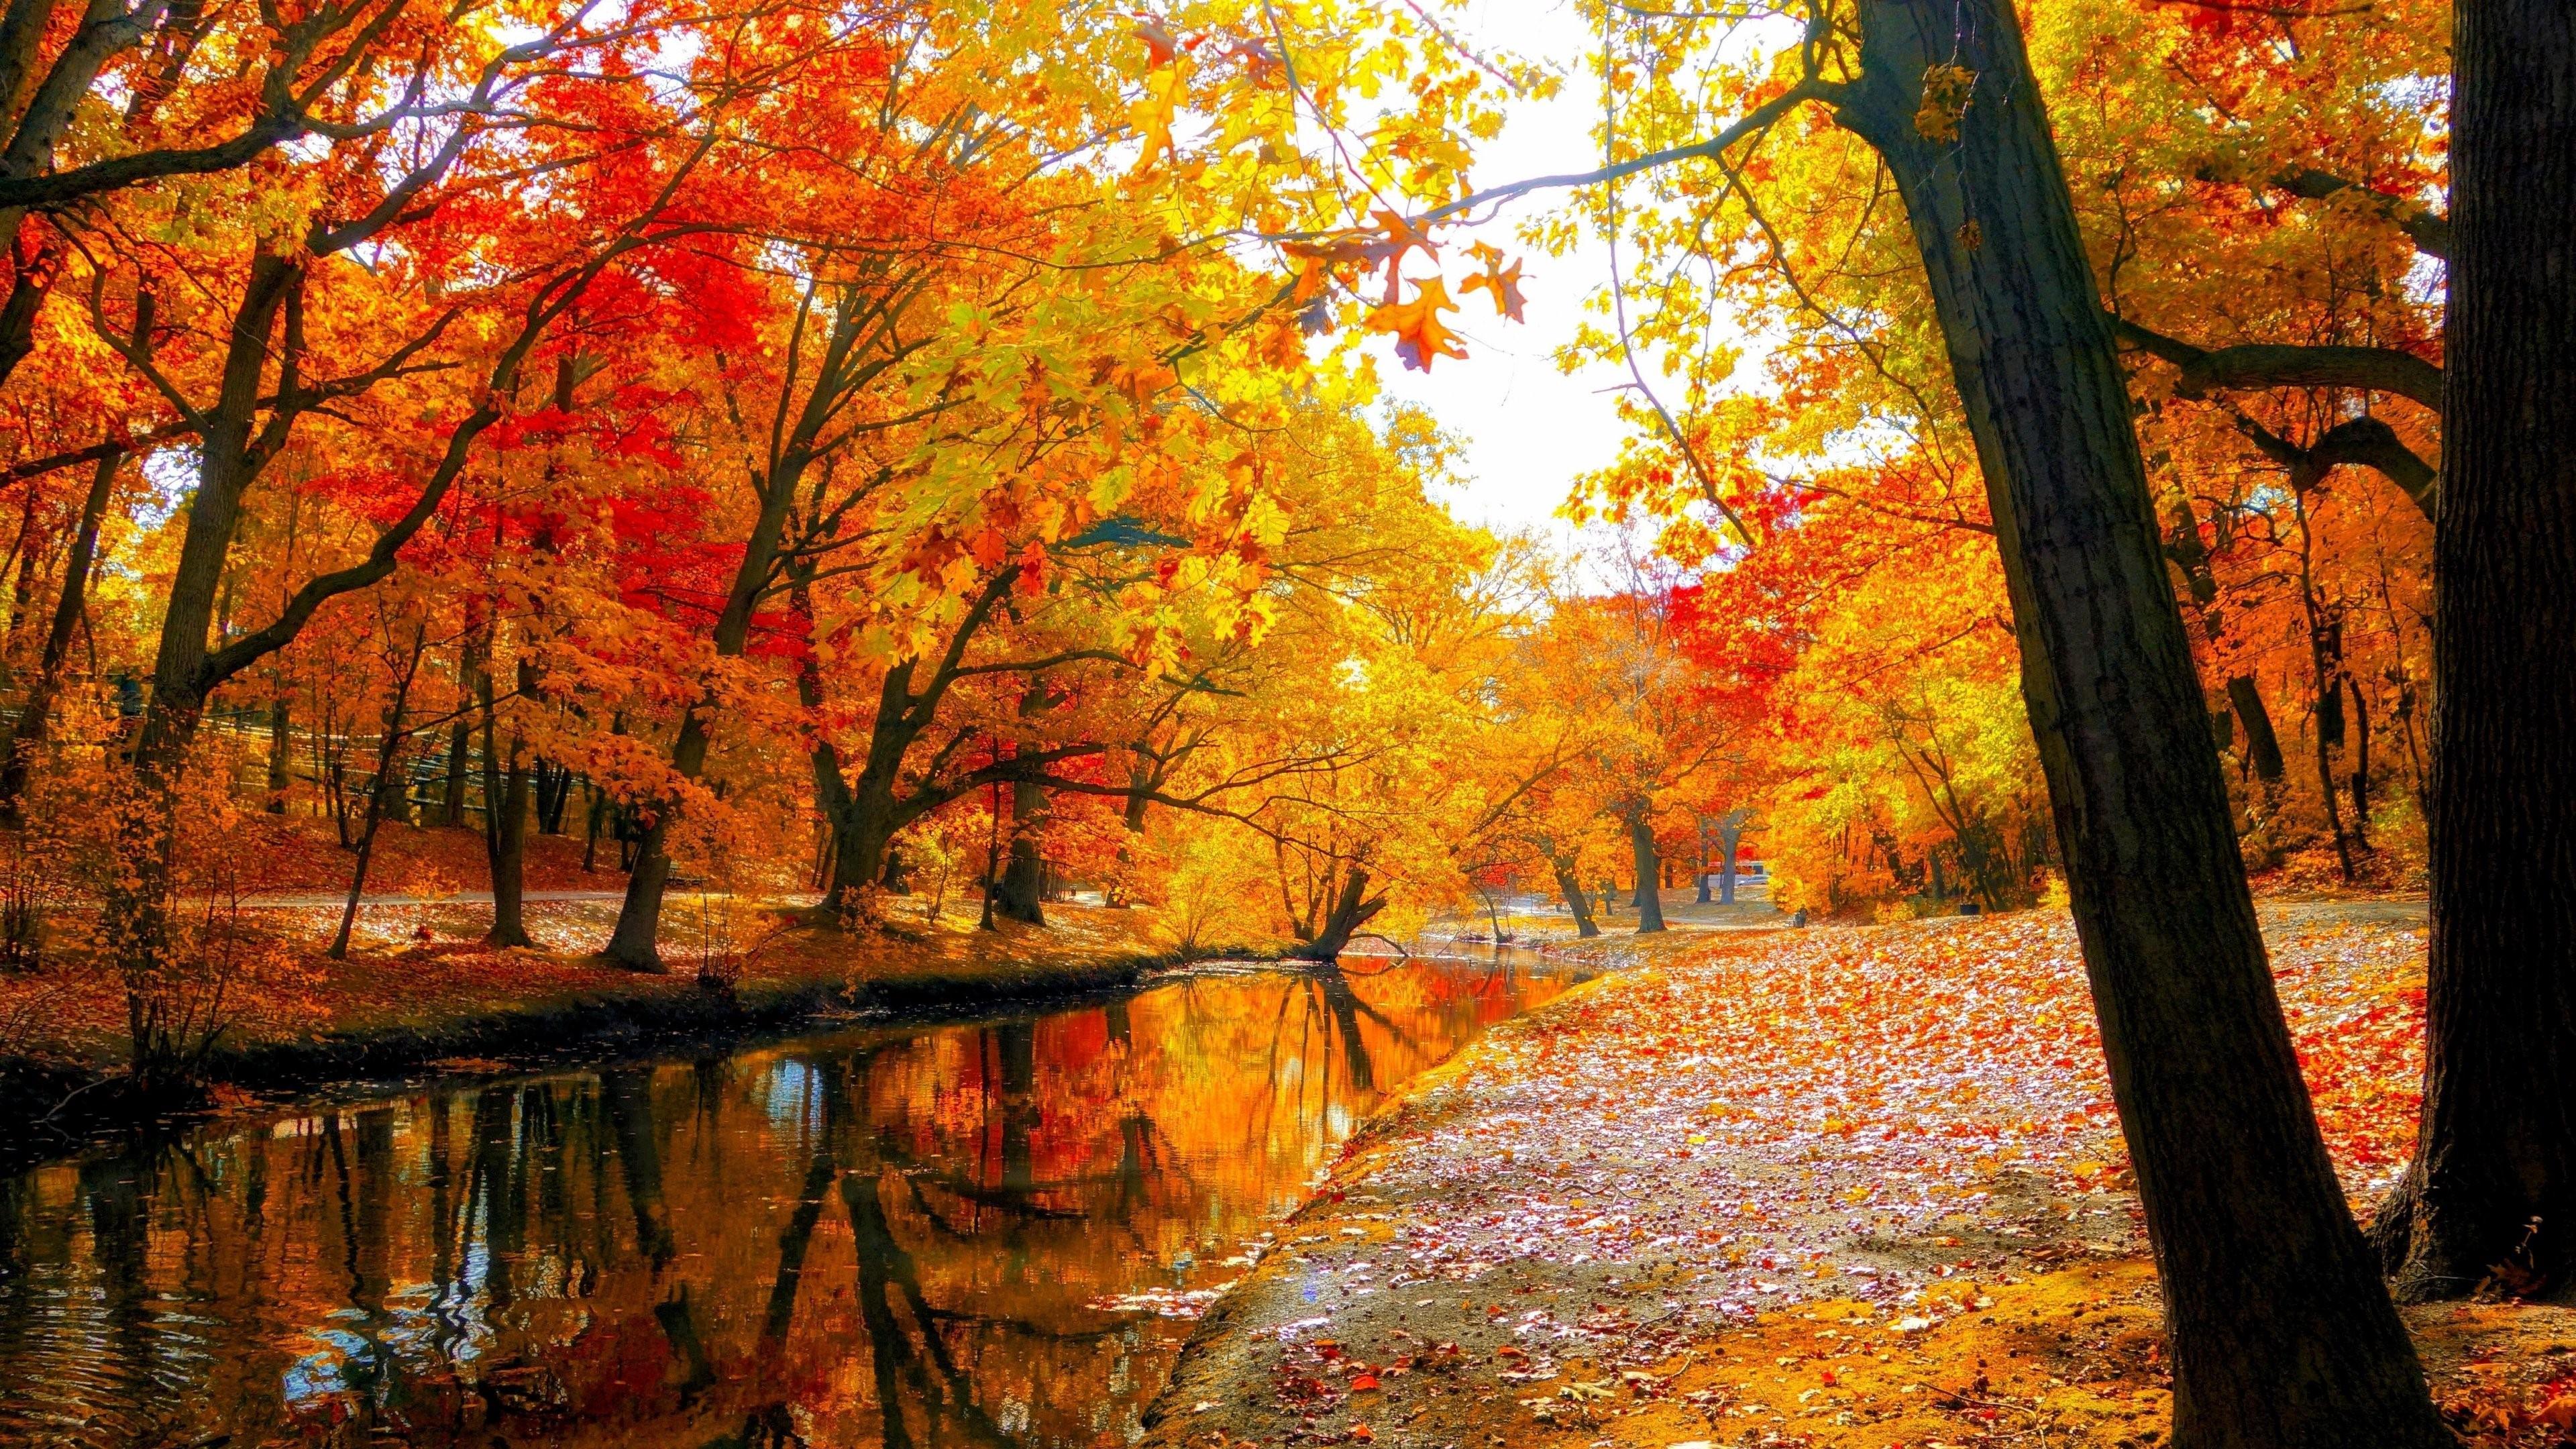 Colorful Landscape Forest Fall Wallpaper Hd Nature 4k Wallpapers Images